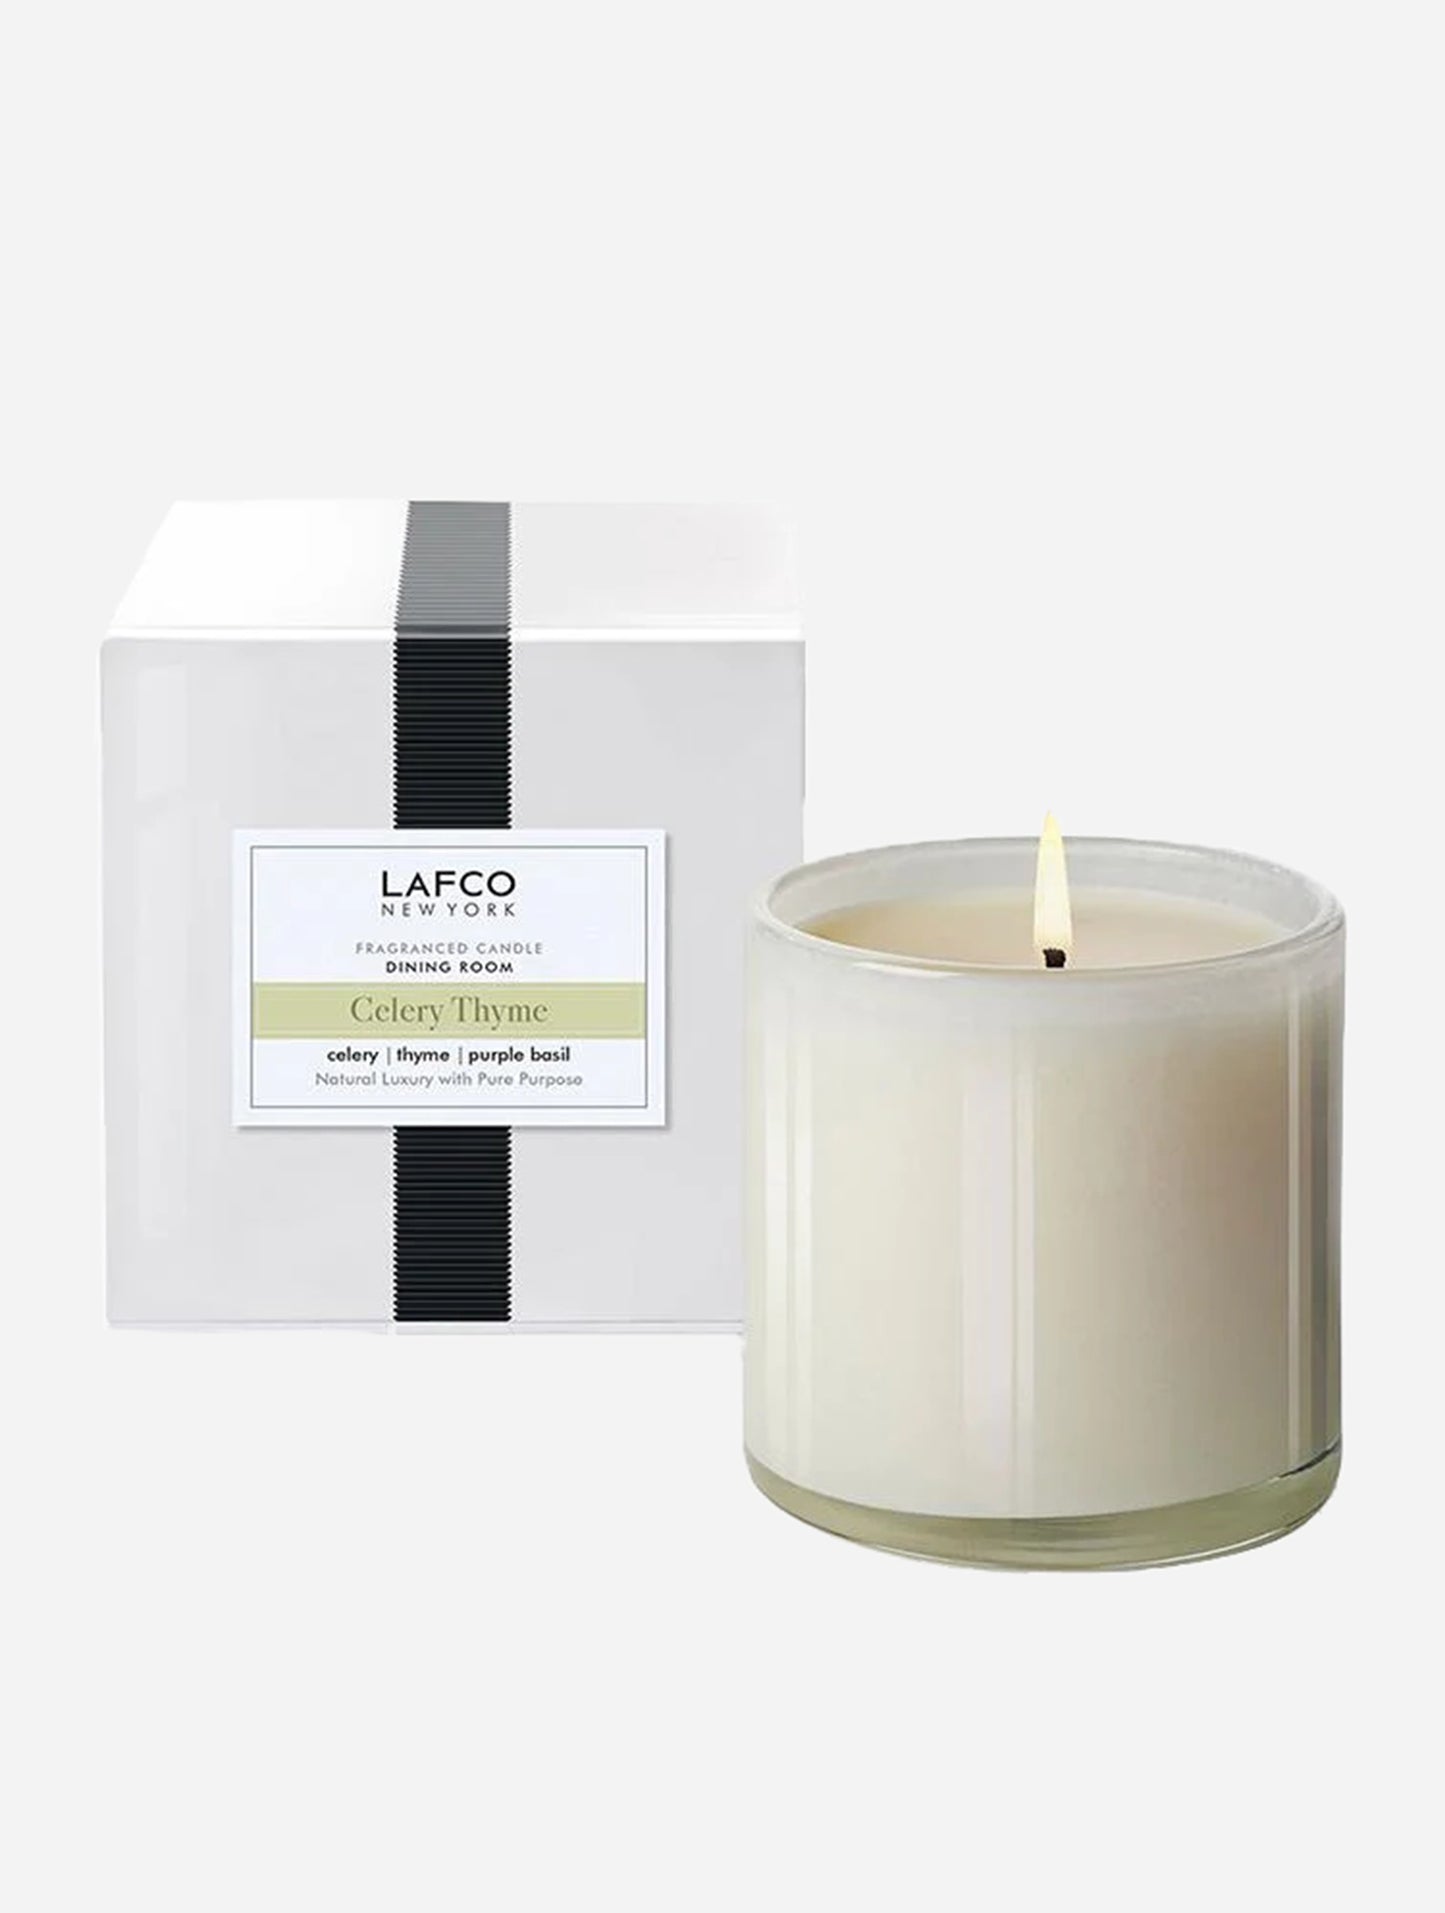 LAFCO Dining Room Candle